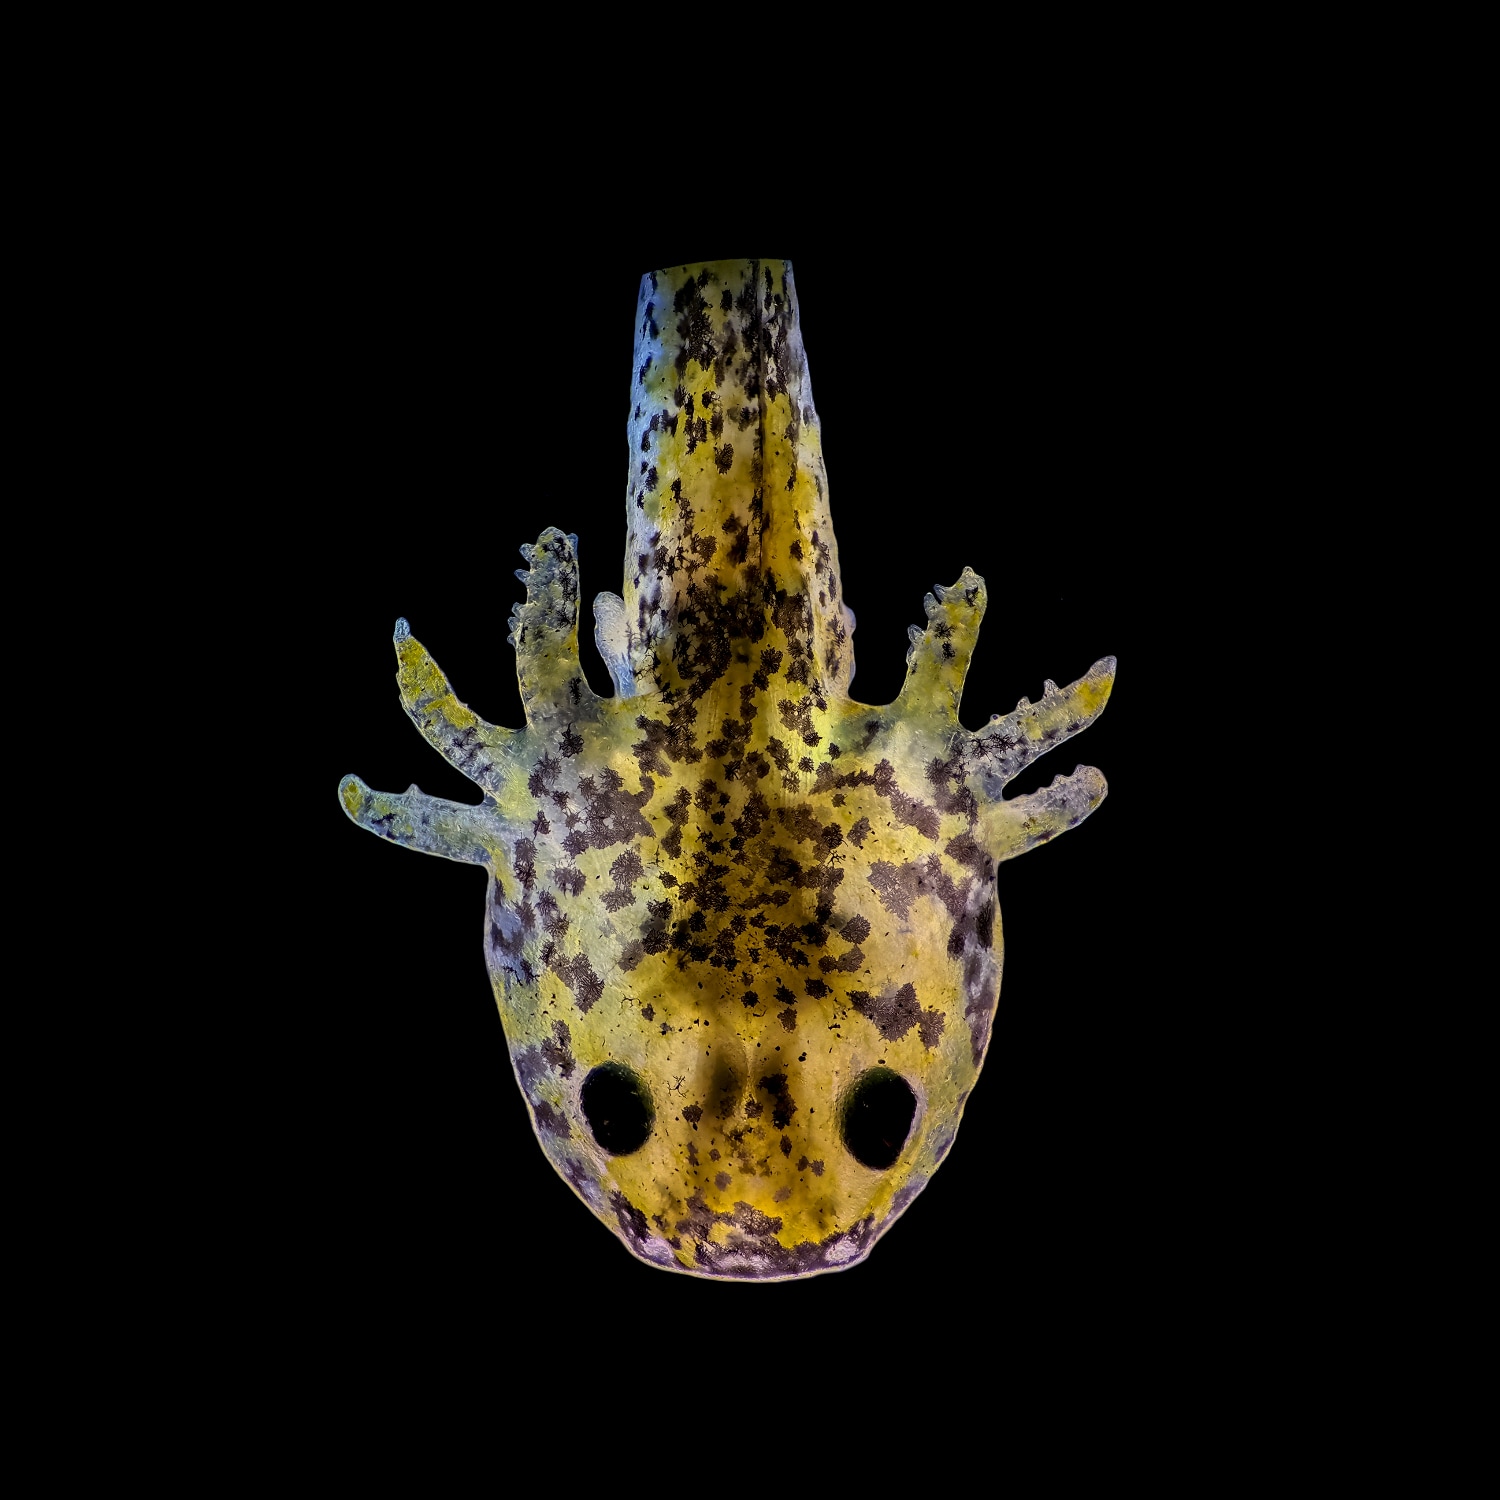 A photo of a 1-week-old yellow axolotl with brown spots seen on a black background.